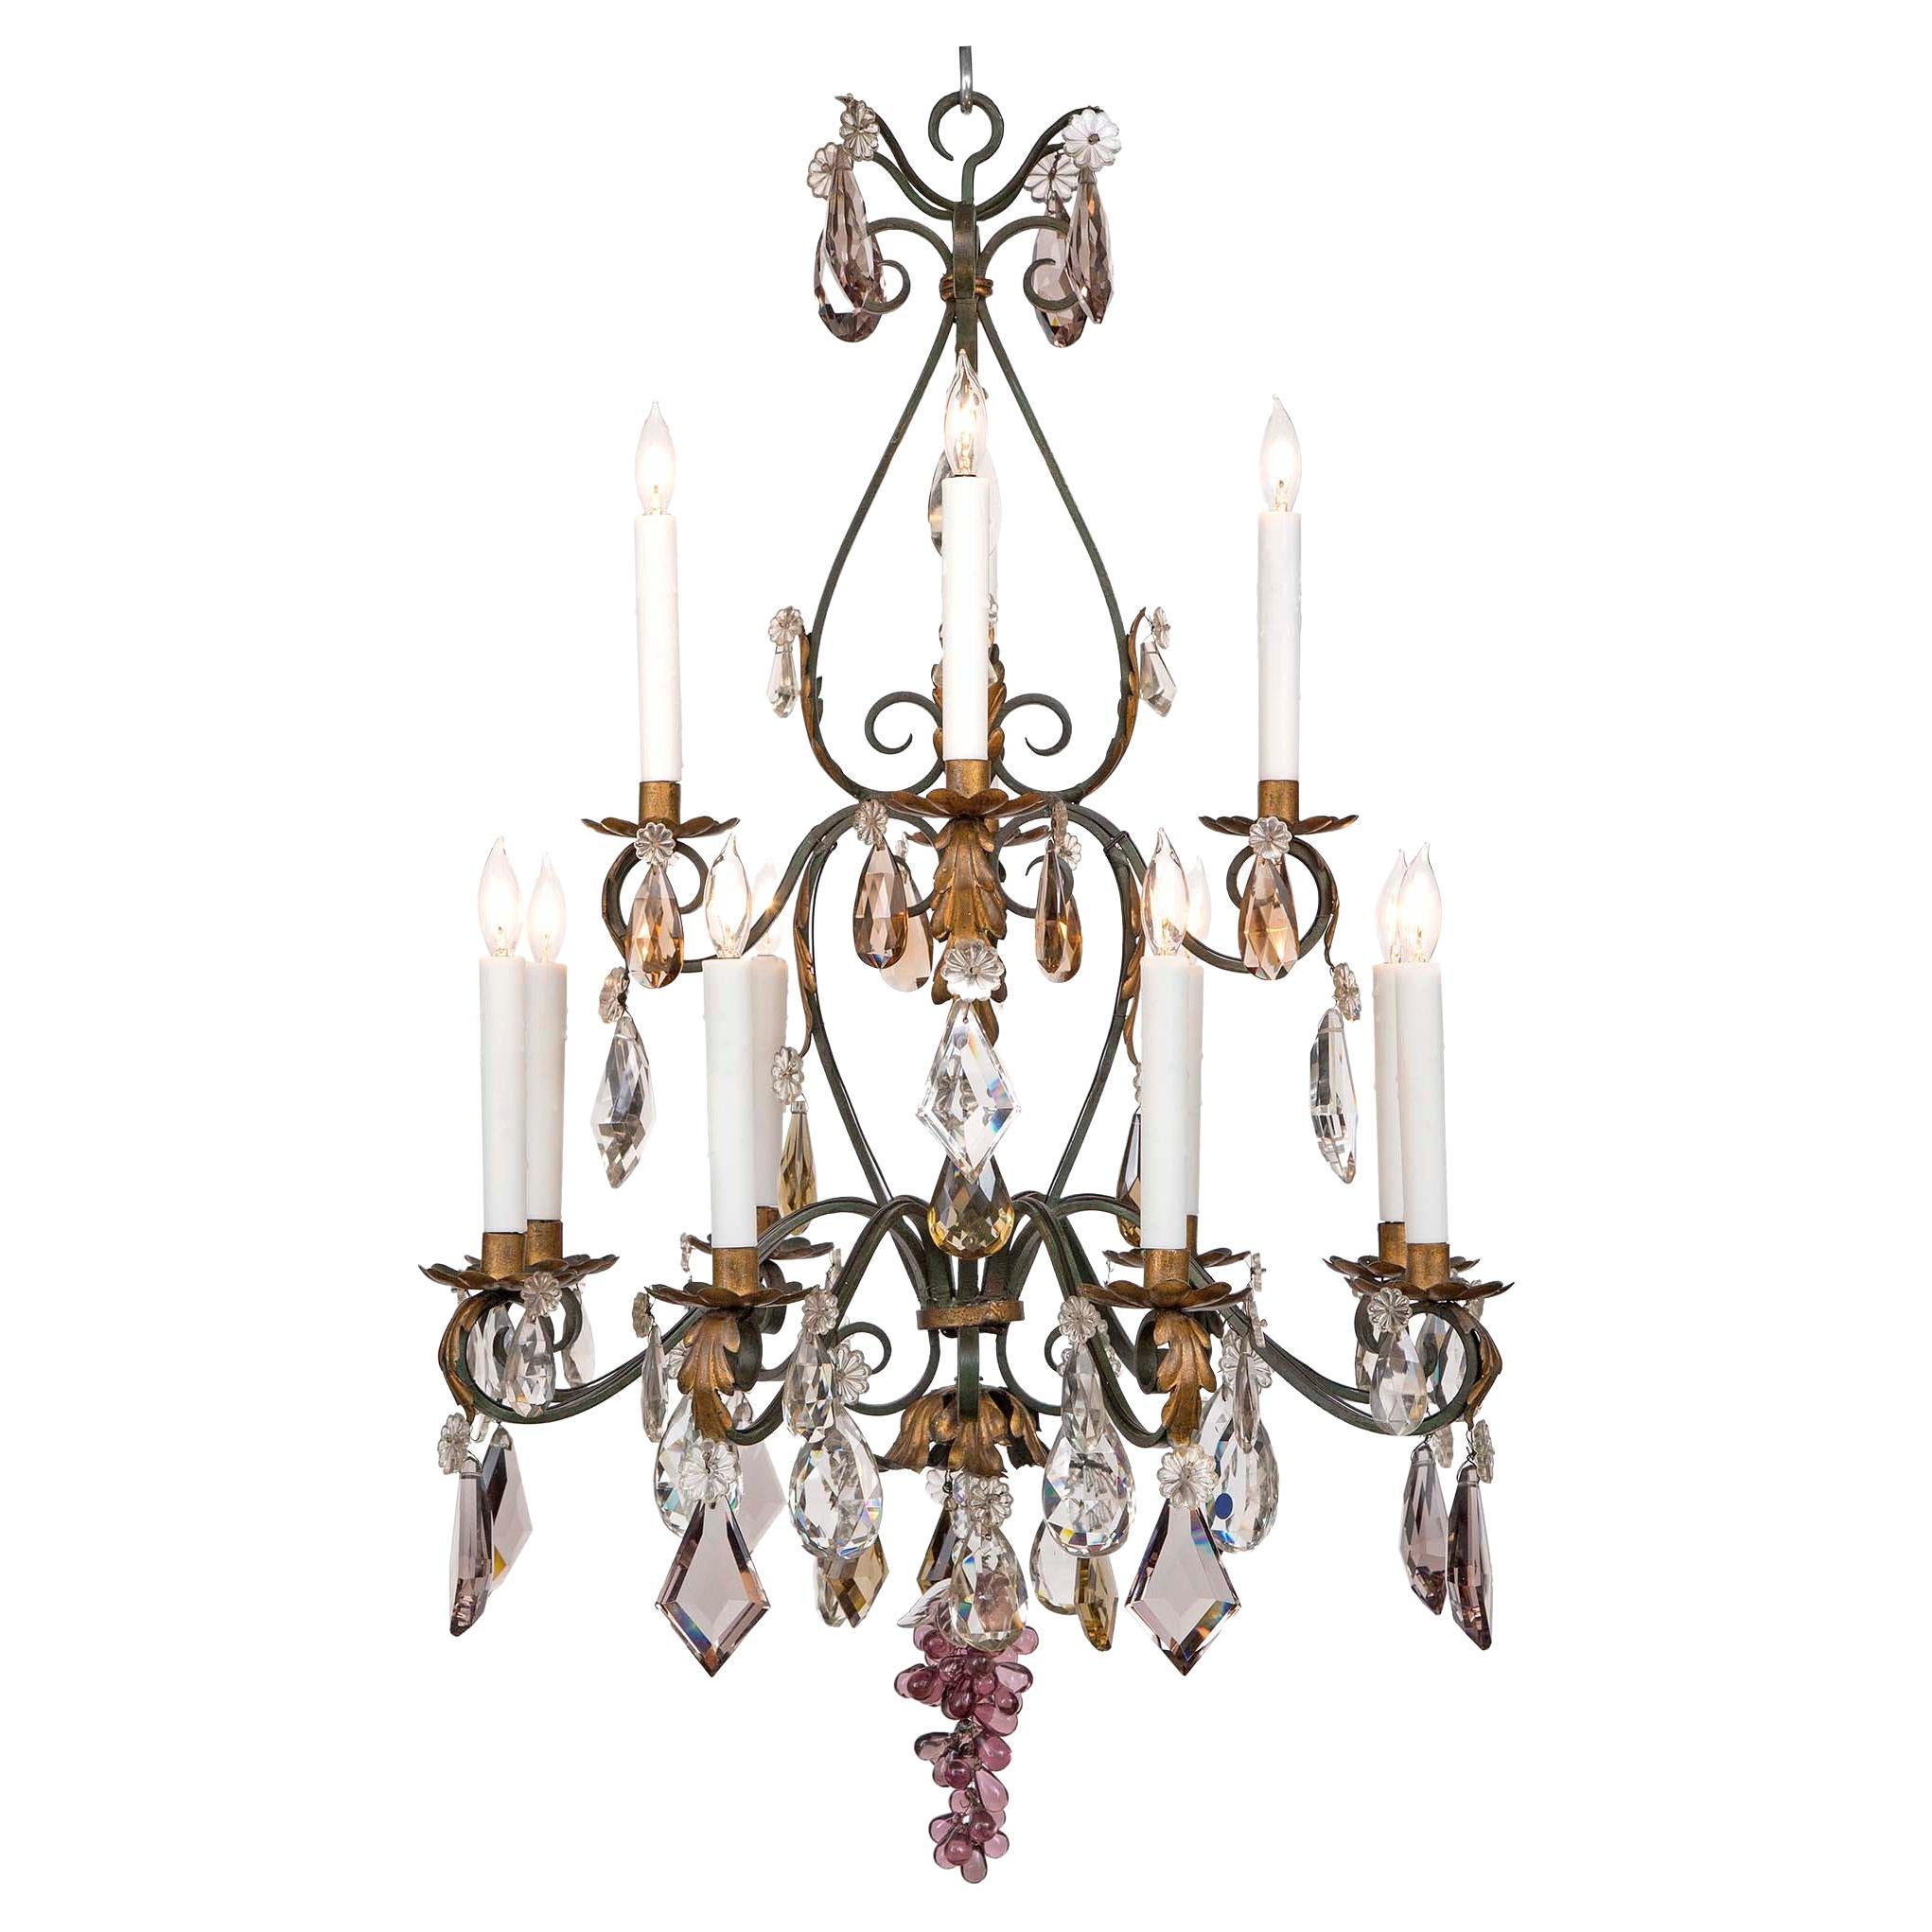 French 19th Century Wrought Iron, Gilt Metal And Baccarat Crystal Chandelier For Sale